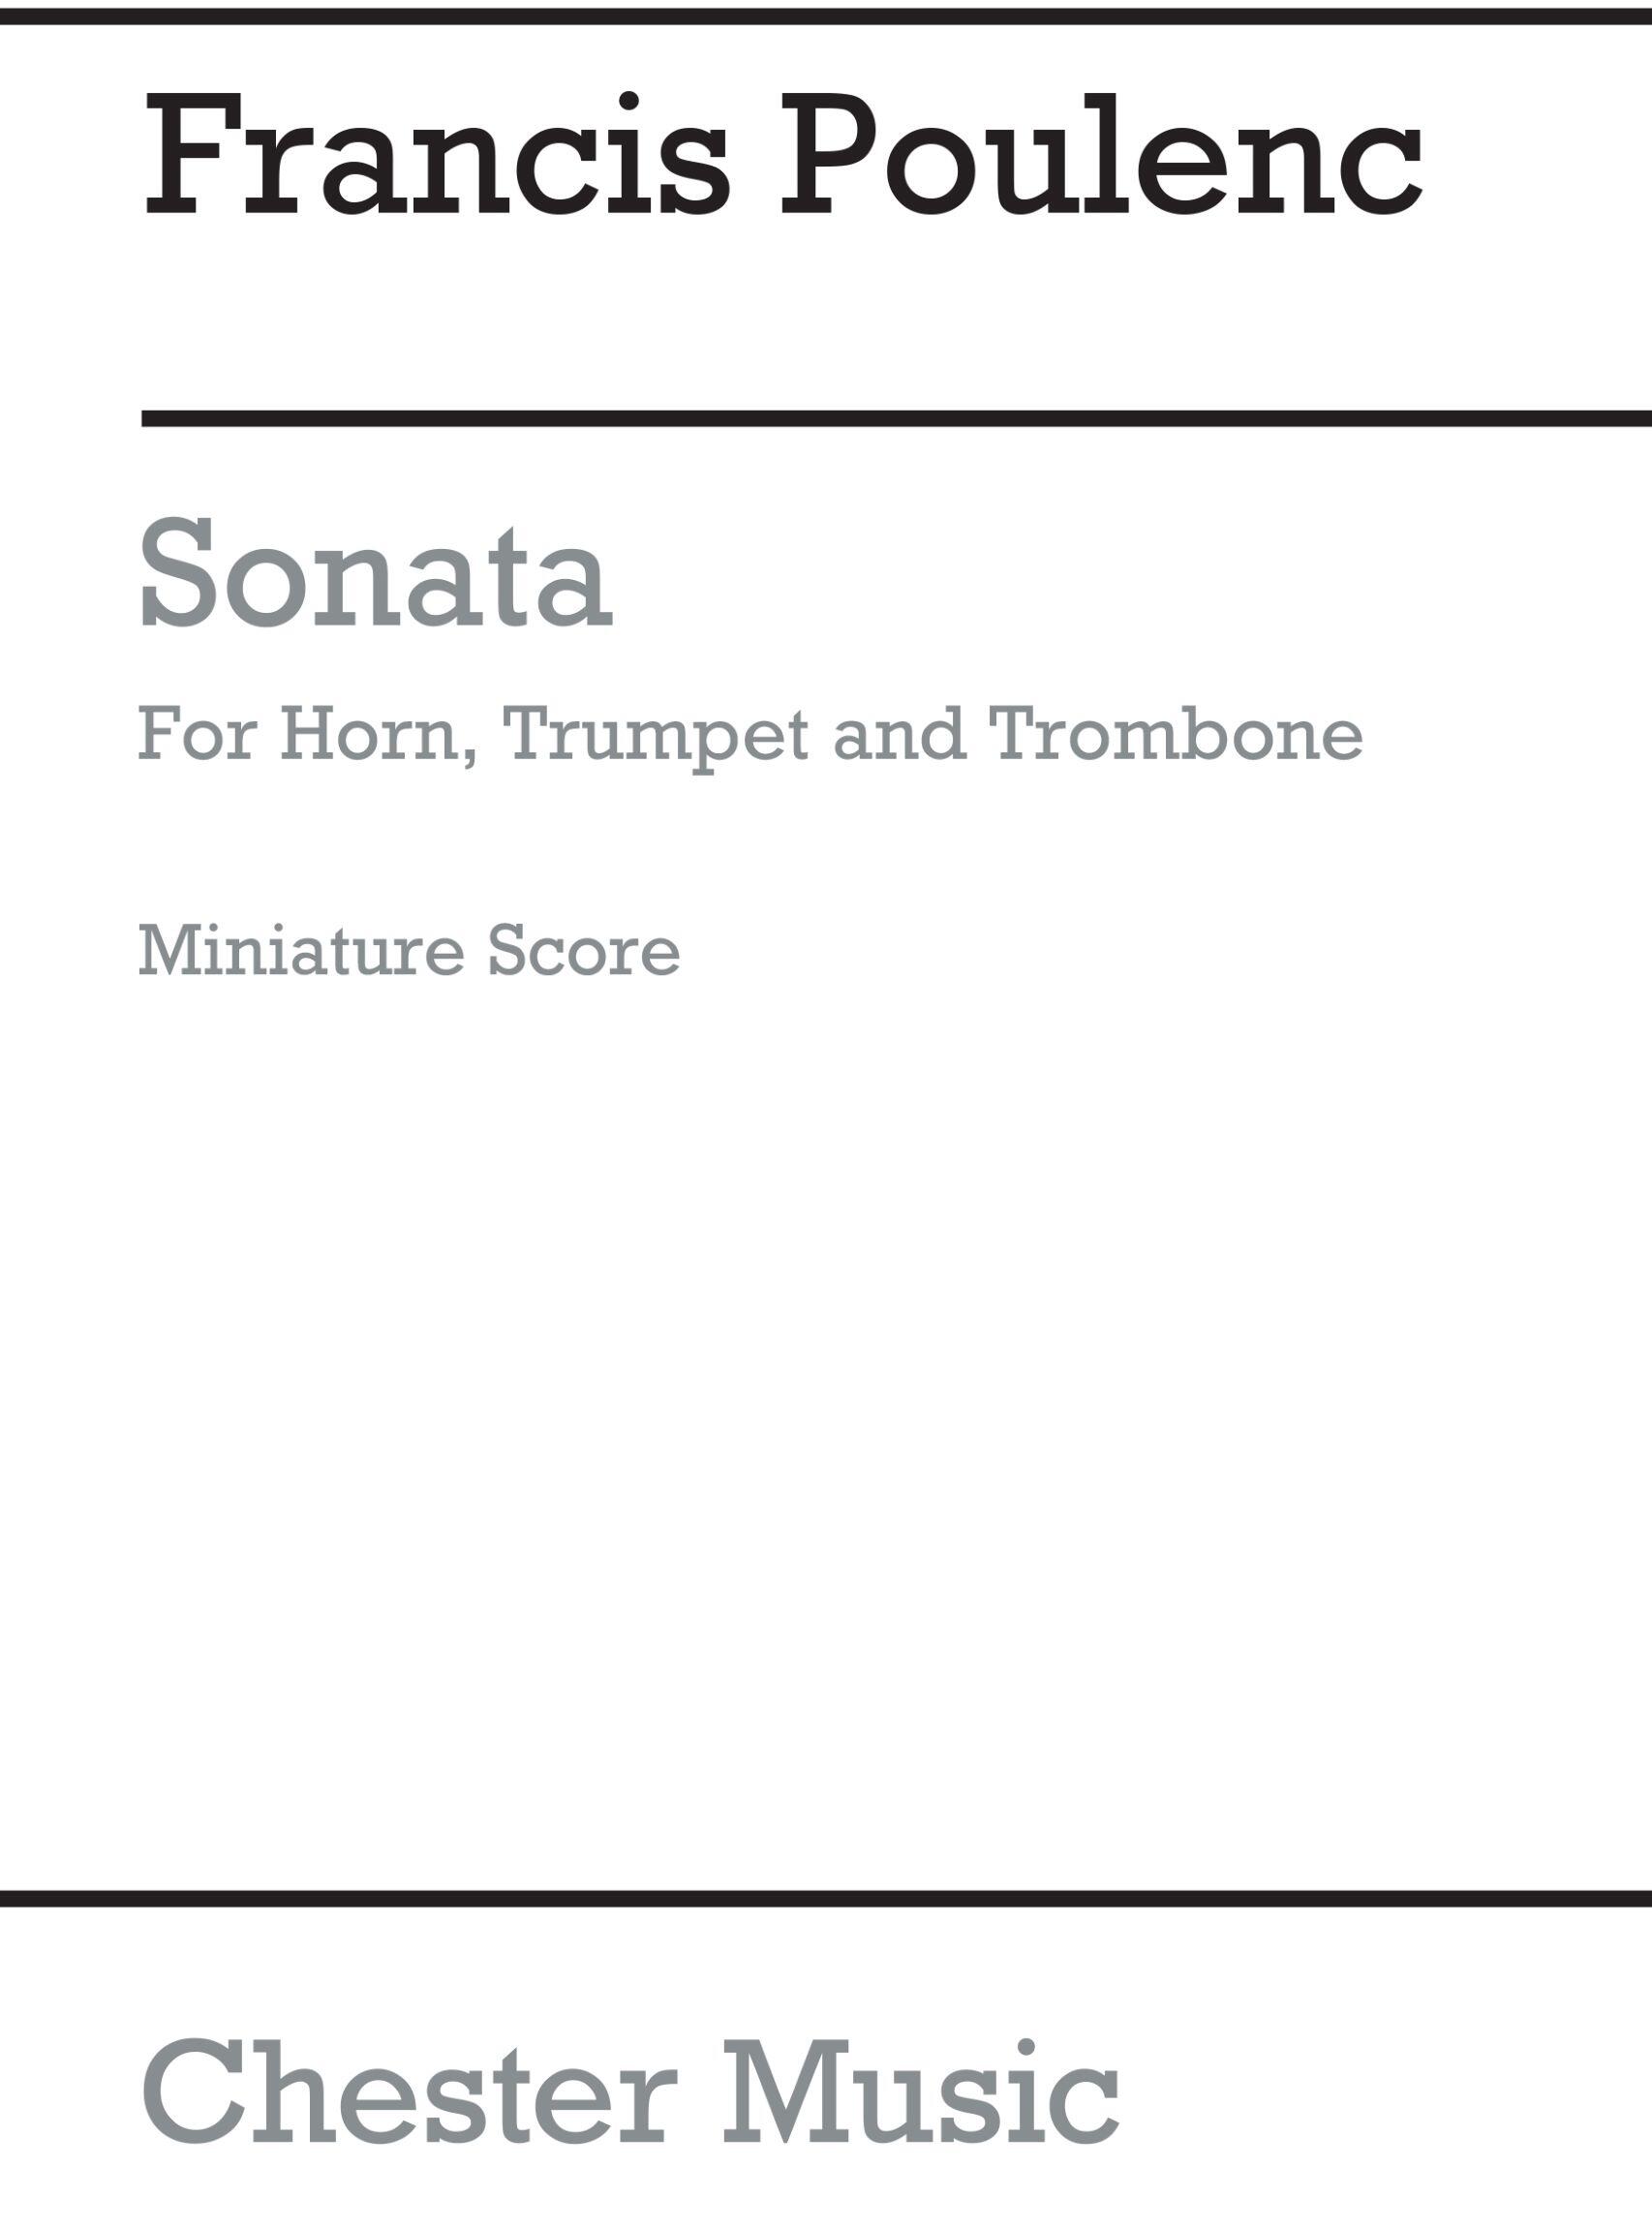 Sonata For Horn, Trumpet And Trombone : photo 1